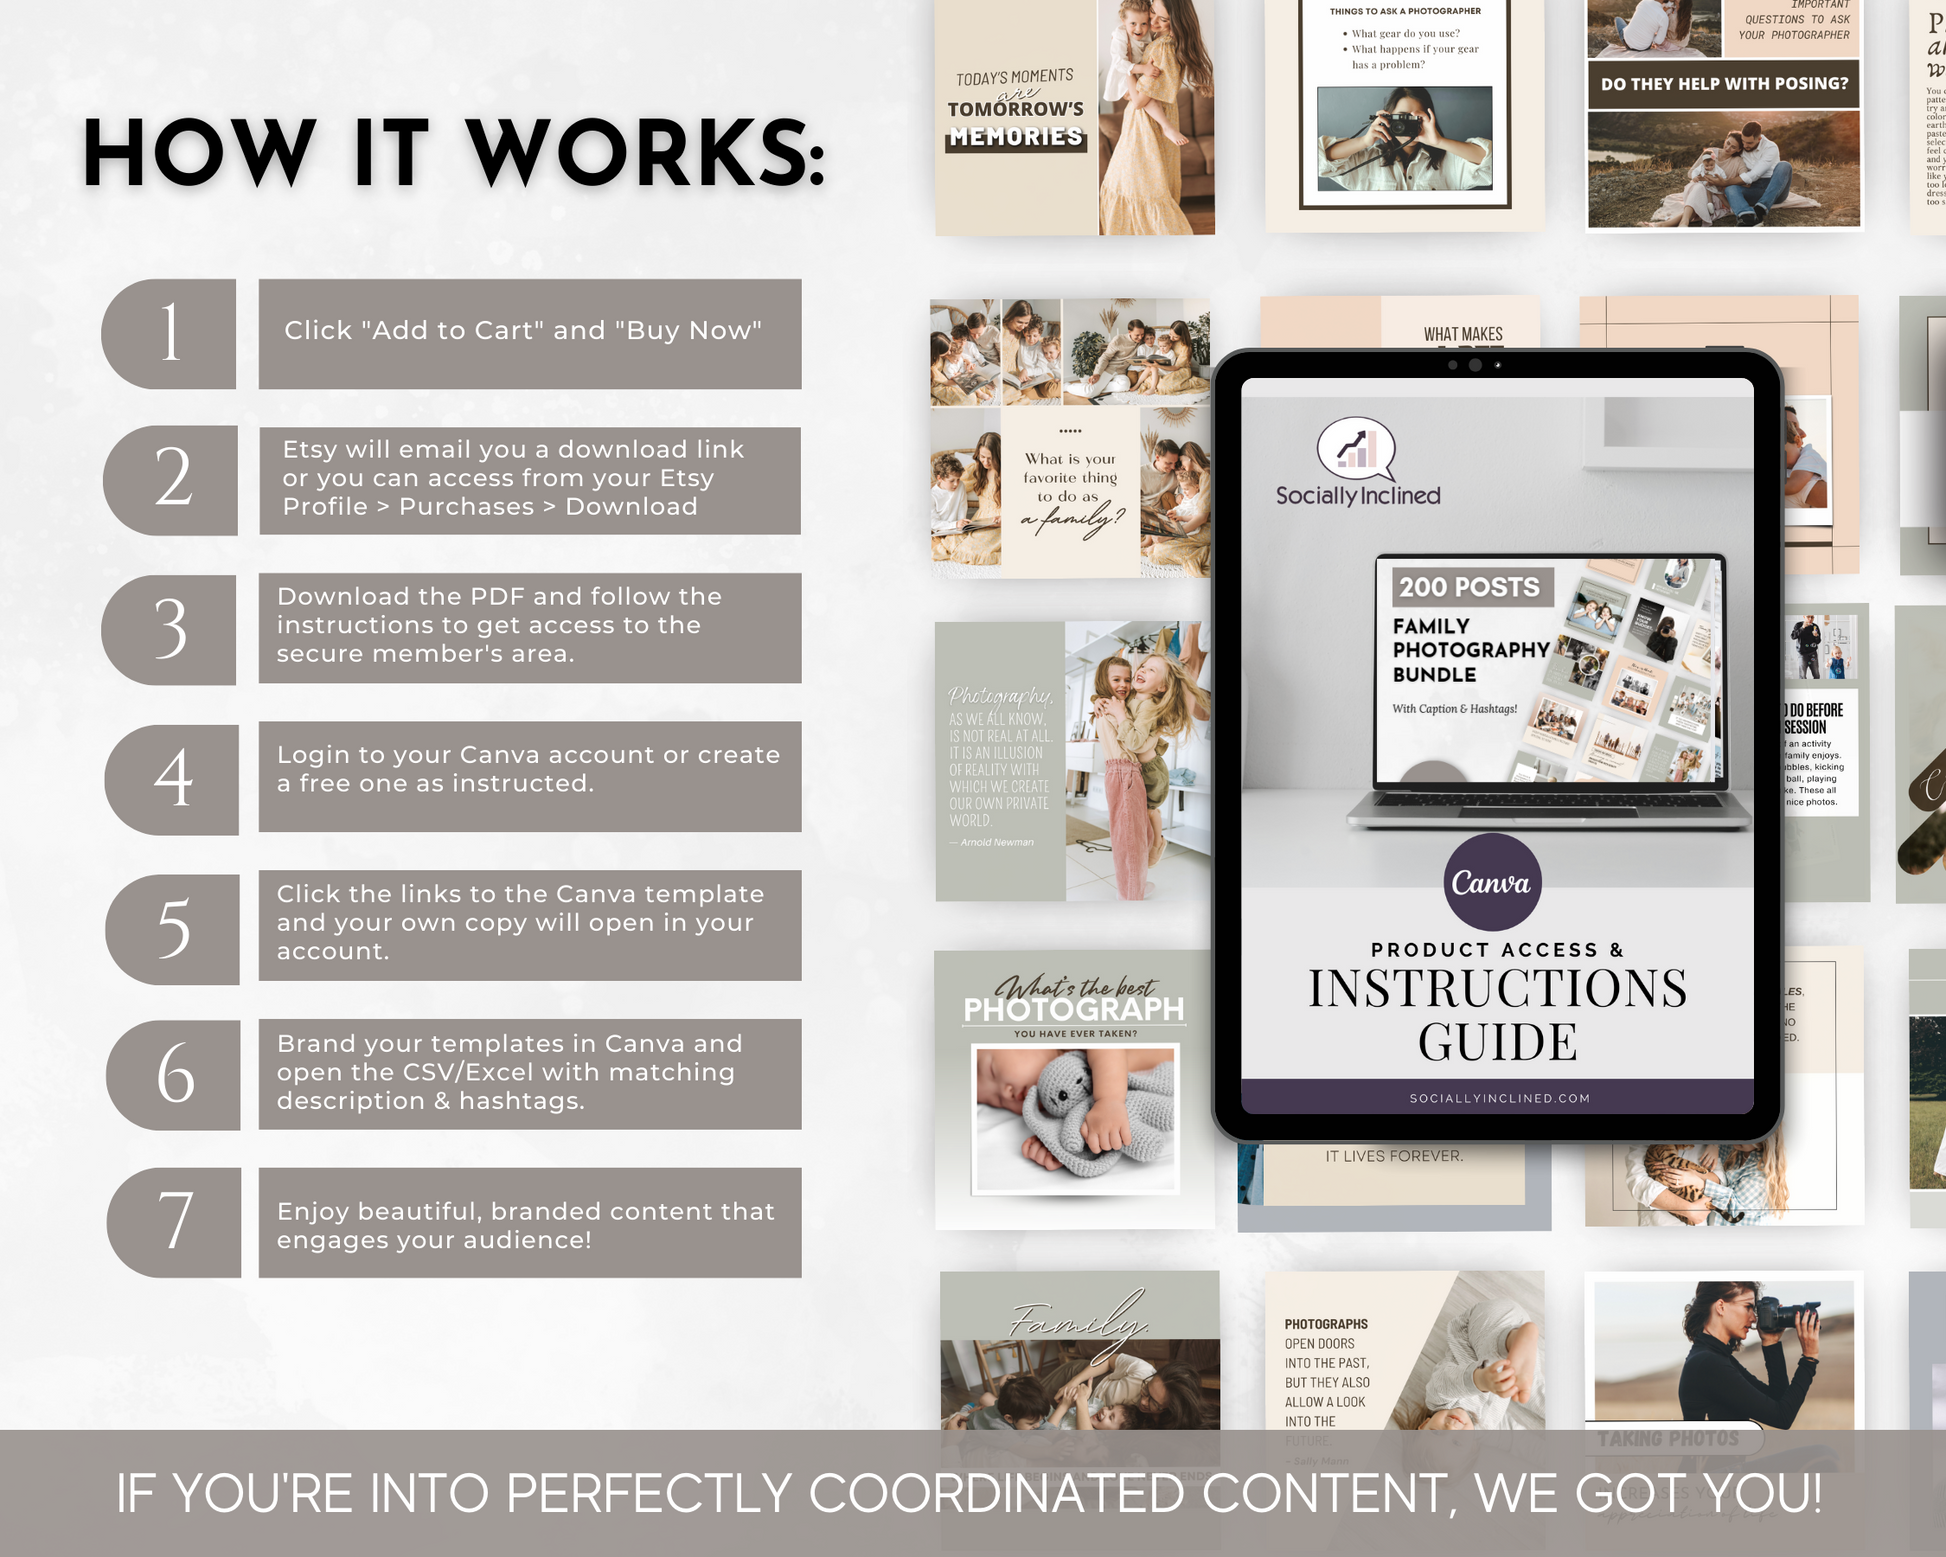 Learn how to use Socially Inclined's Family Photography Social Media Post Bundle with Canva Templates, the popular social media platform, through tutorials focused on family photography and content creation.